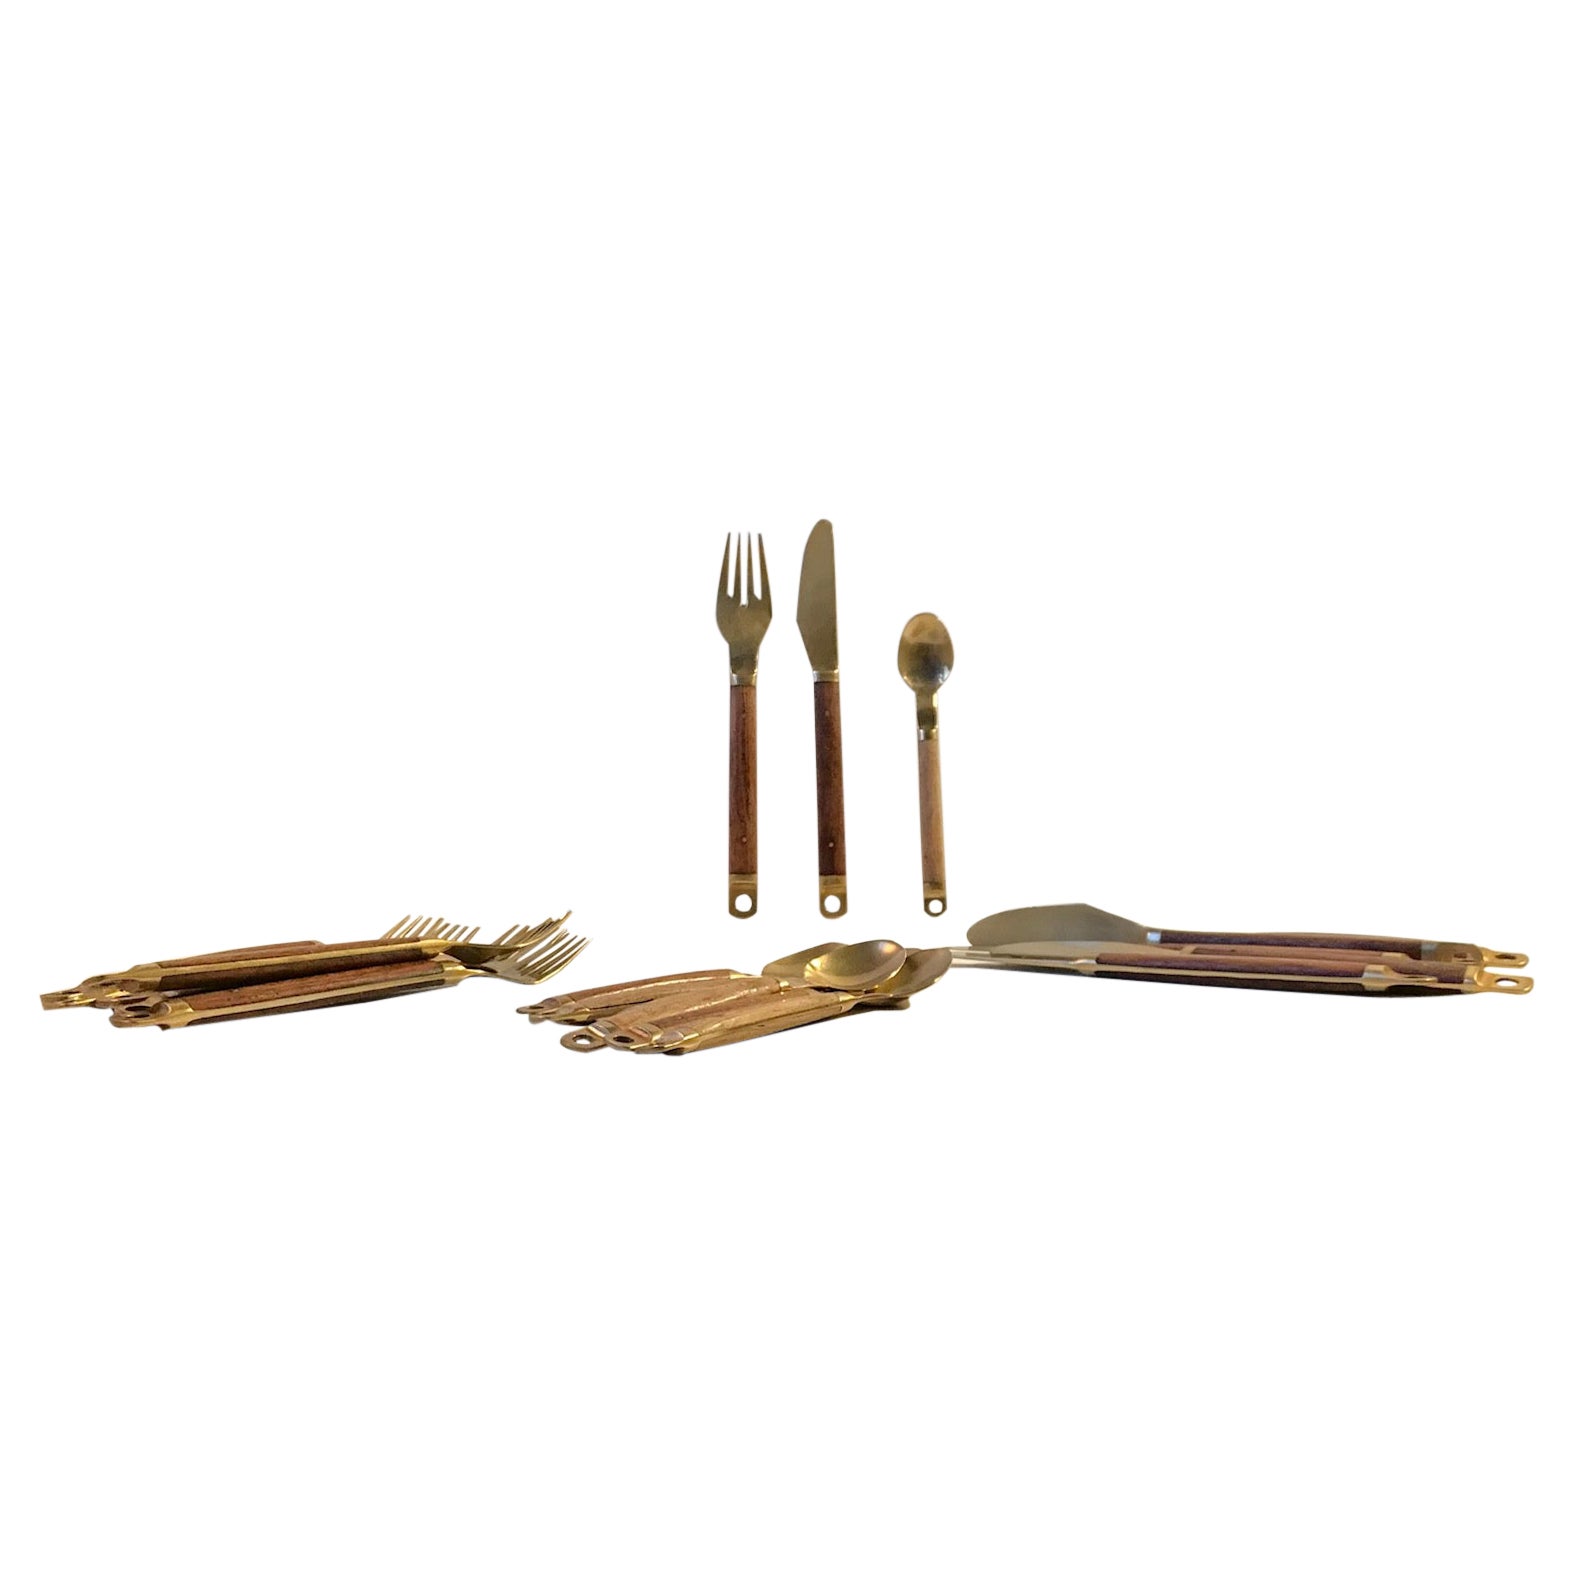 Danish Modern Brass and Teak Cutlery Set from Carl Cohr, 1960s For Sale